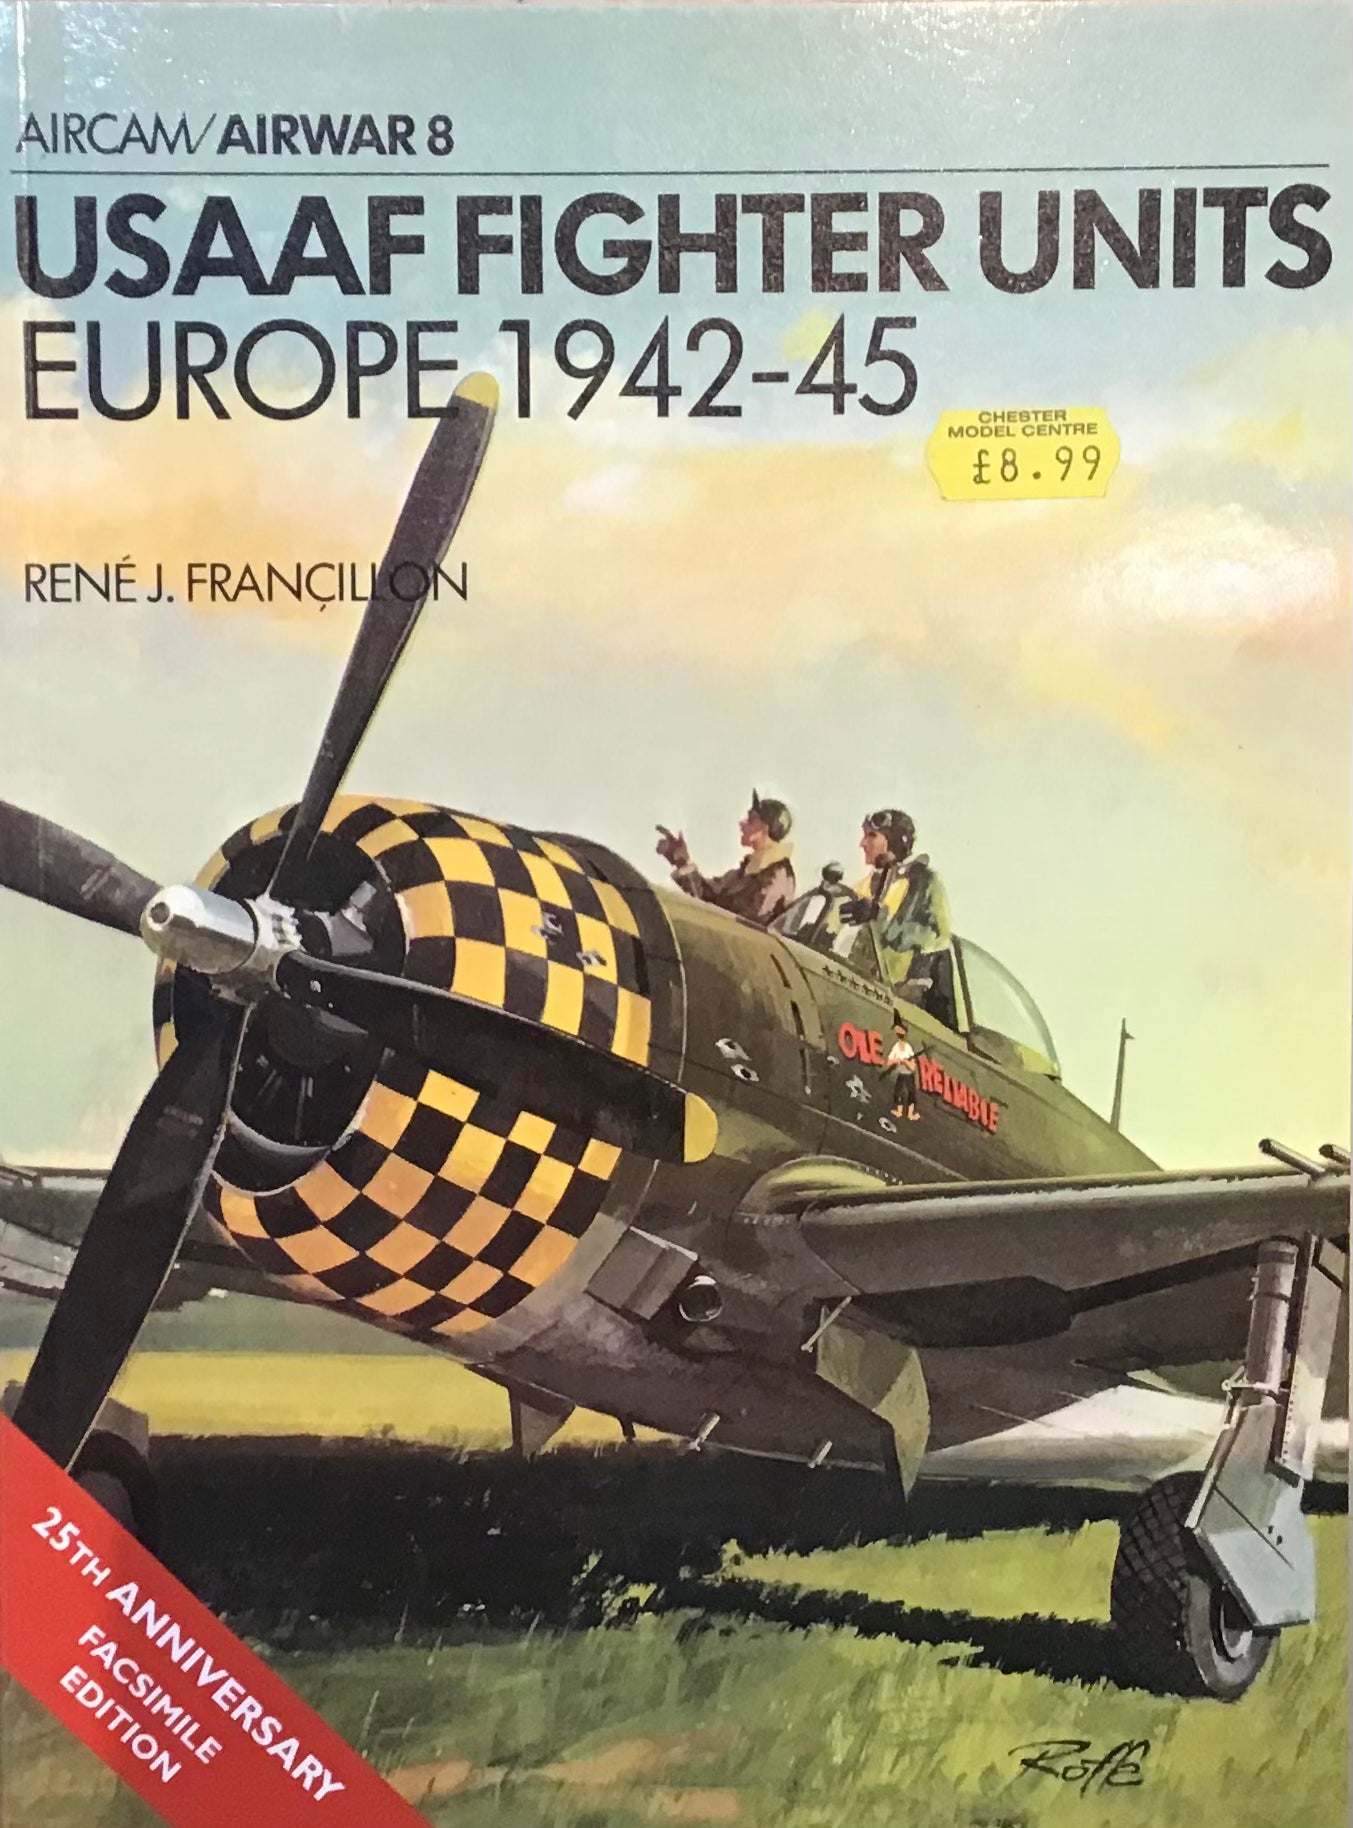 USAAF Fighter Units Europe 1942-45 Airwar 8 Facsimile Edition by Rene J. Francillon - Chester Model Centre